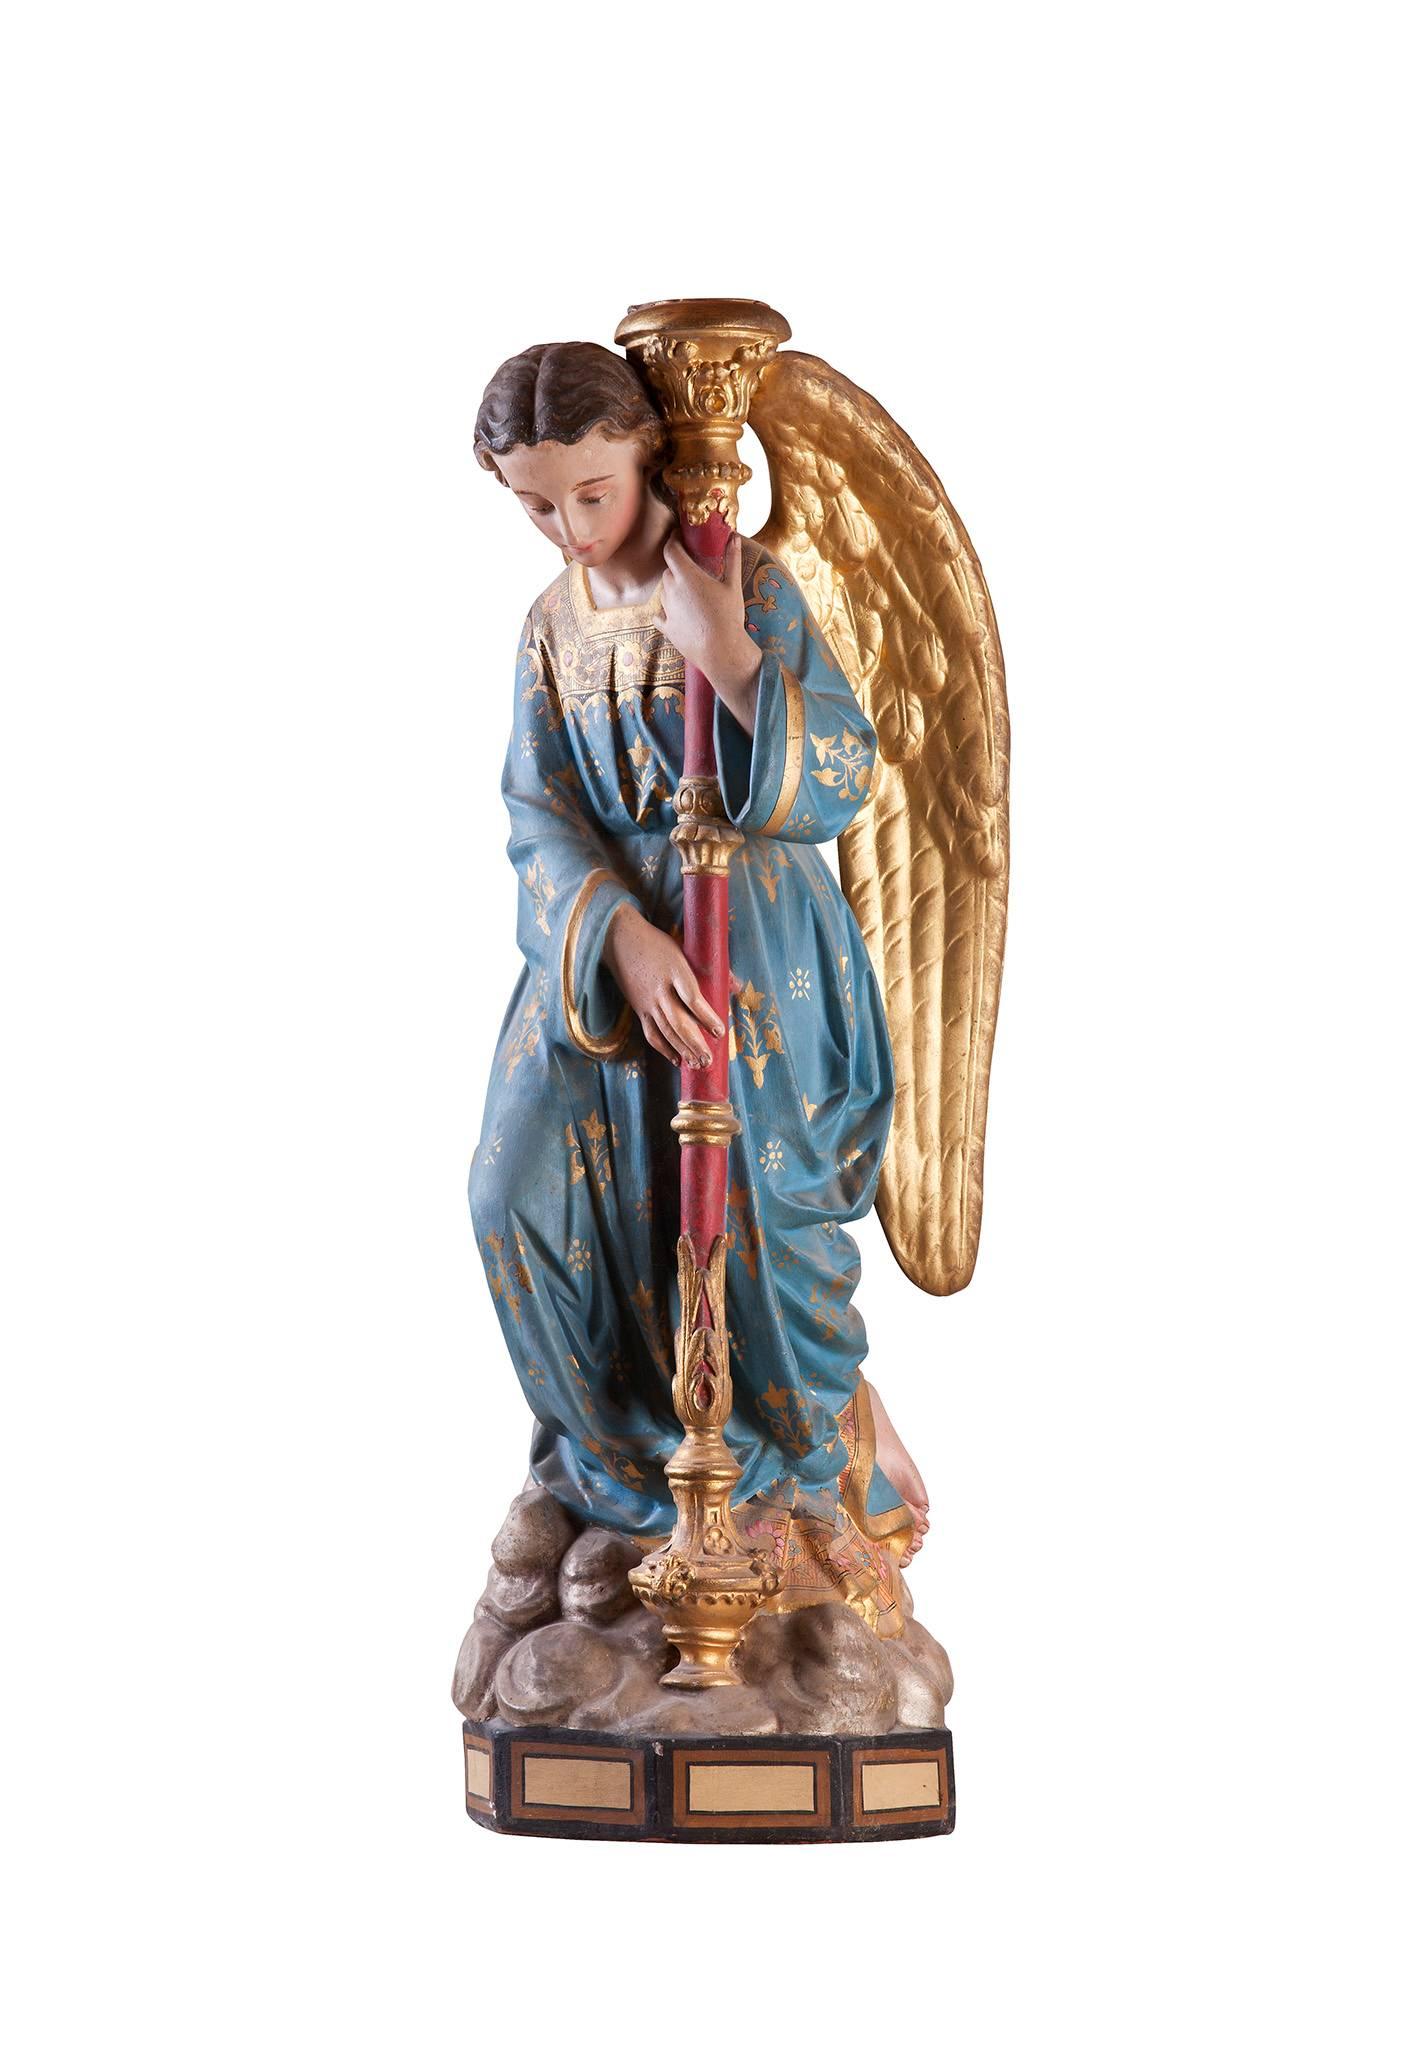 This is a very nice done statue Gothic Revival. Angel as candleholder on a cloud. Wonderful in color.